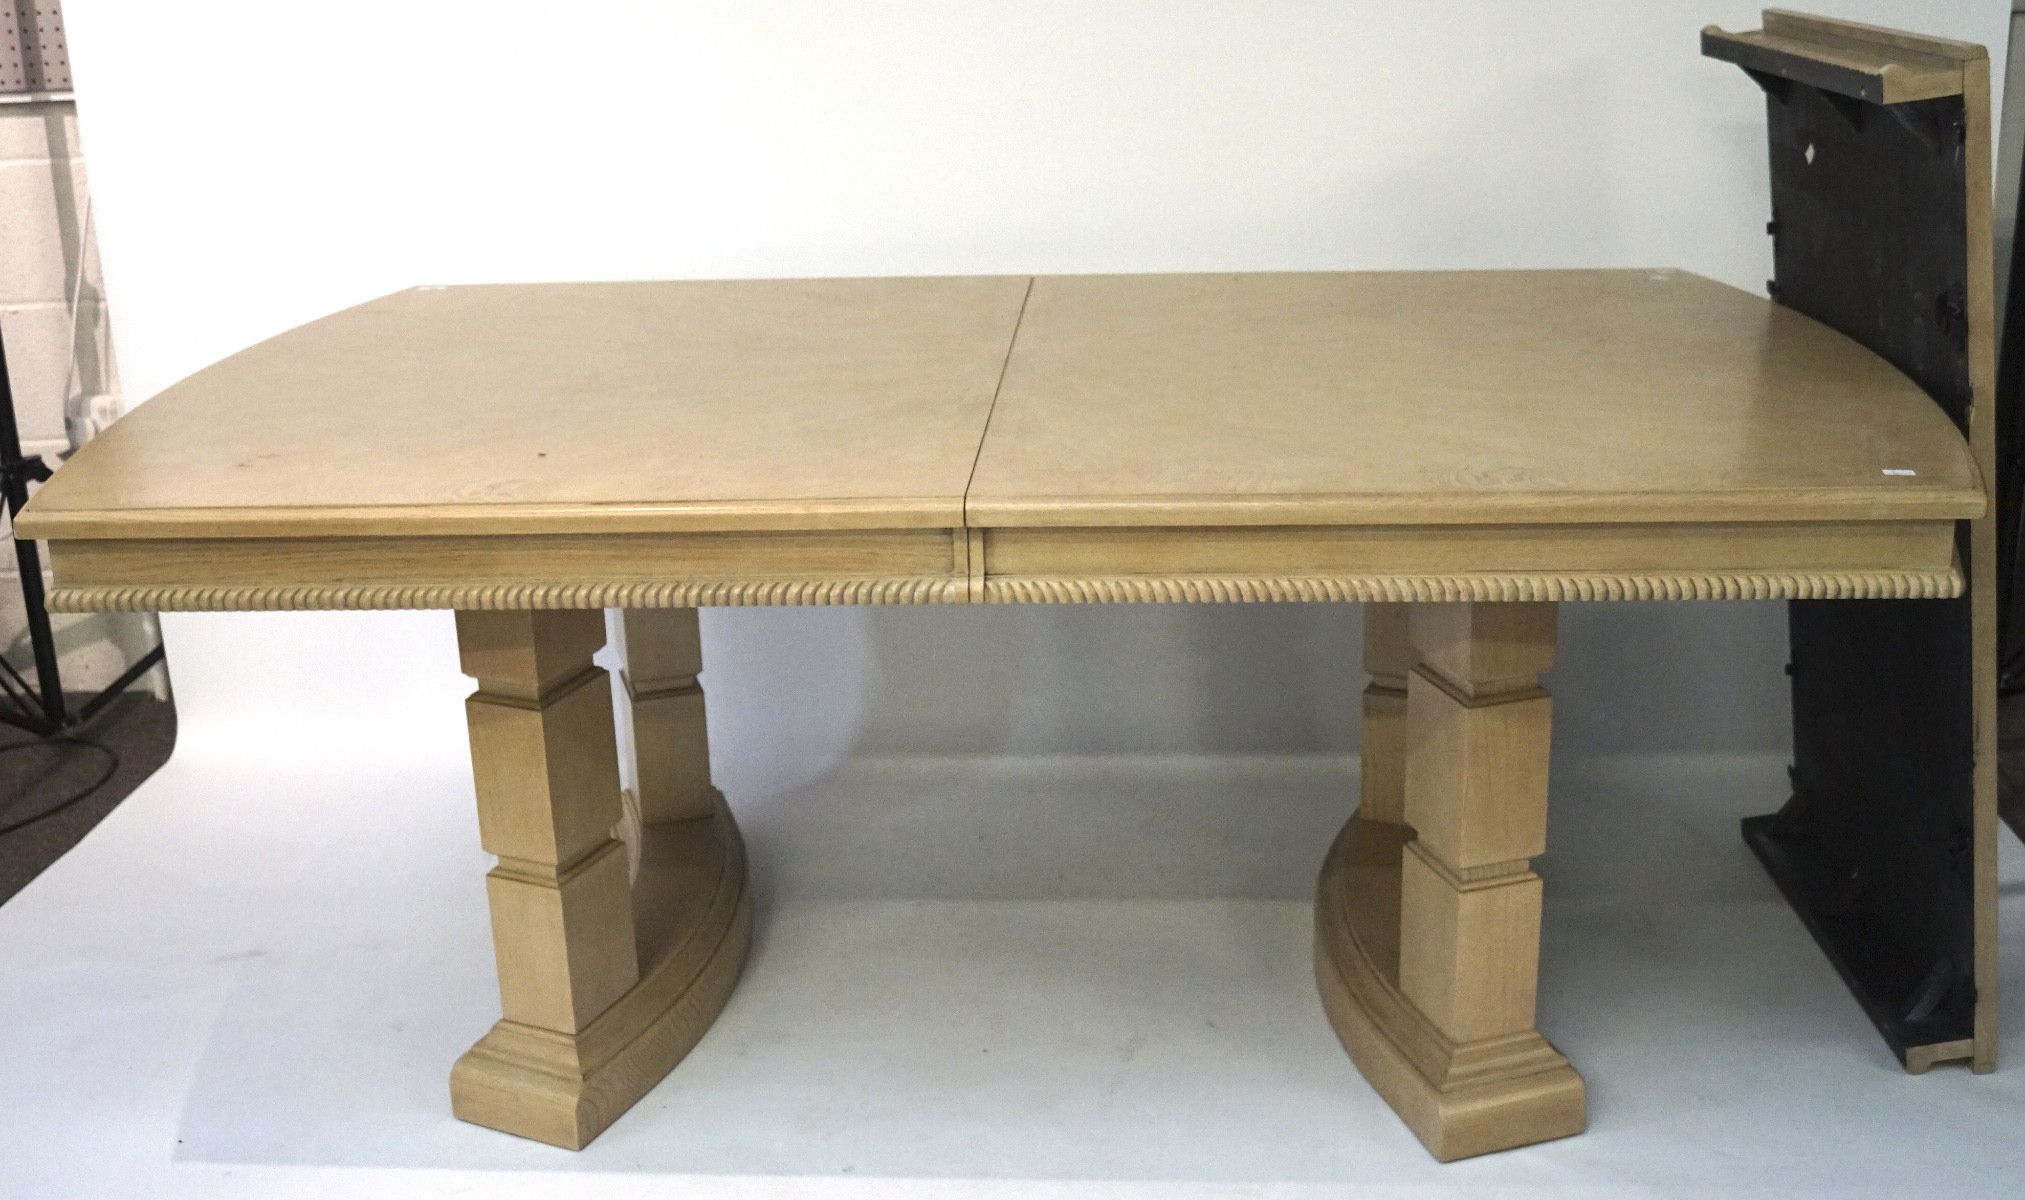 A large wooden extendable dining table.